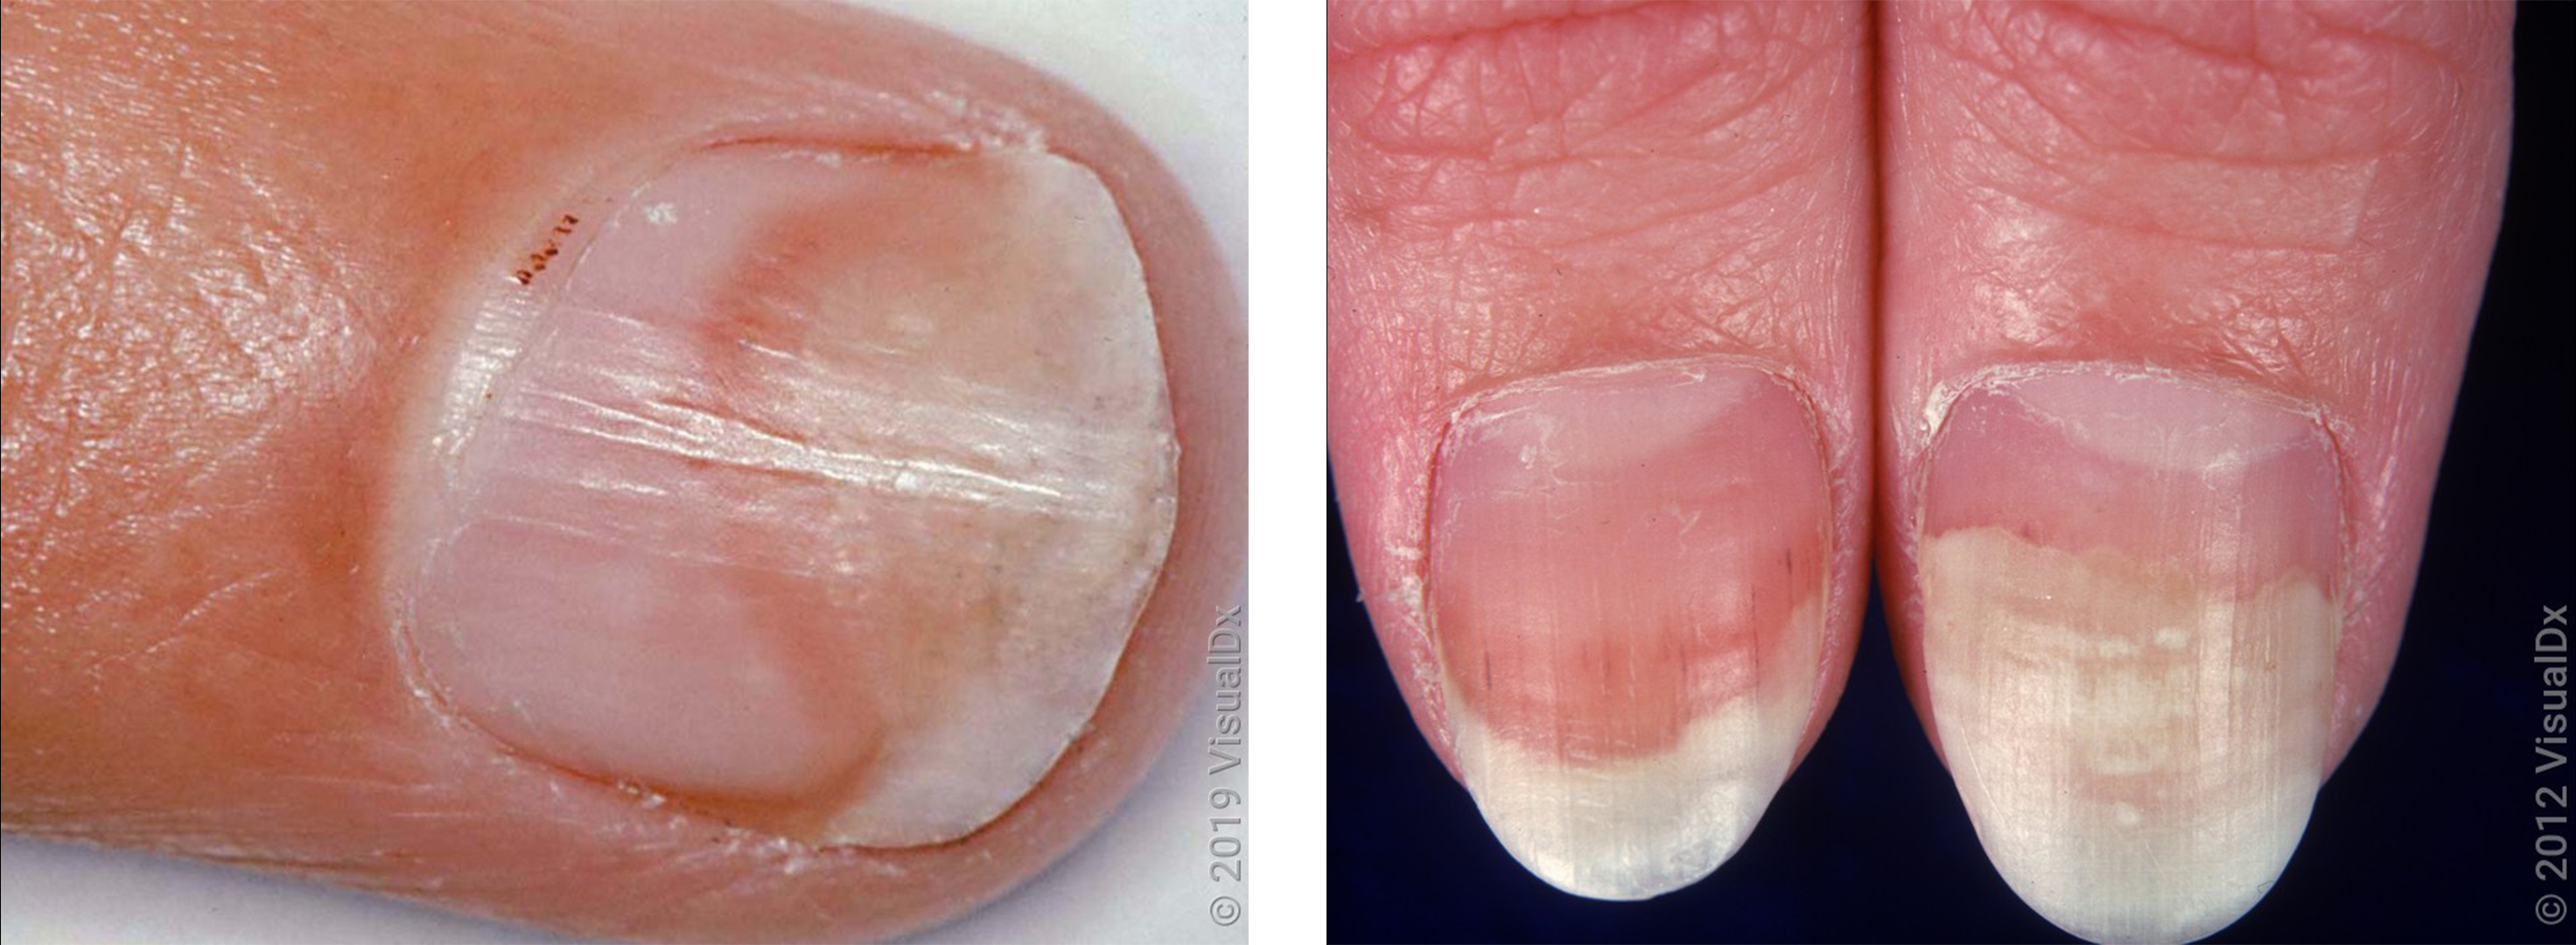 Evaluation of nail lines: Color and shape hold clues | Cleveland Clinic  Journal of Medicine